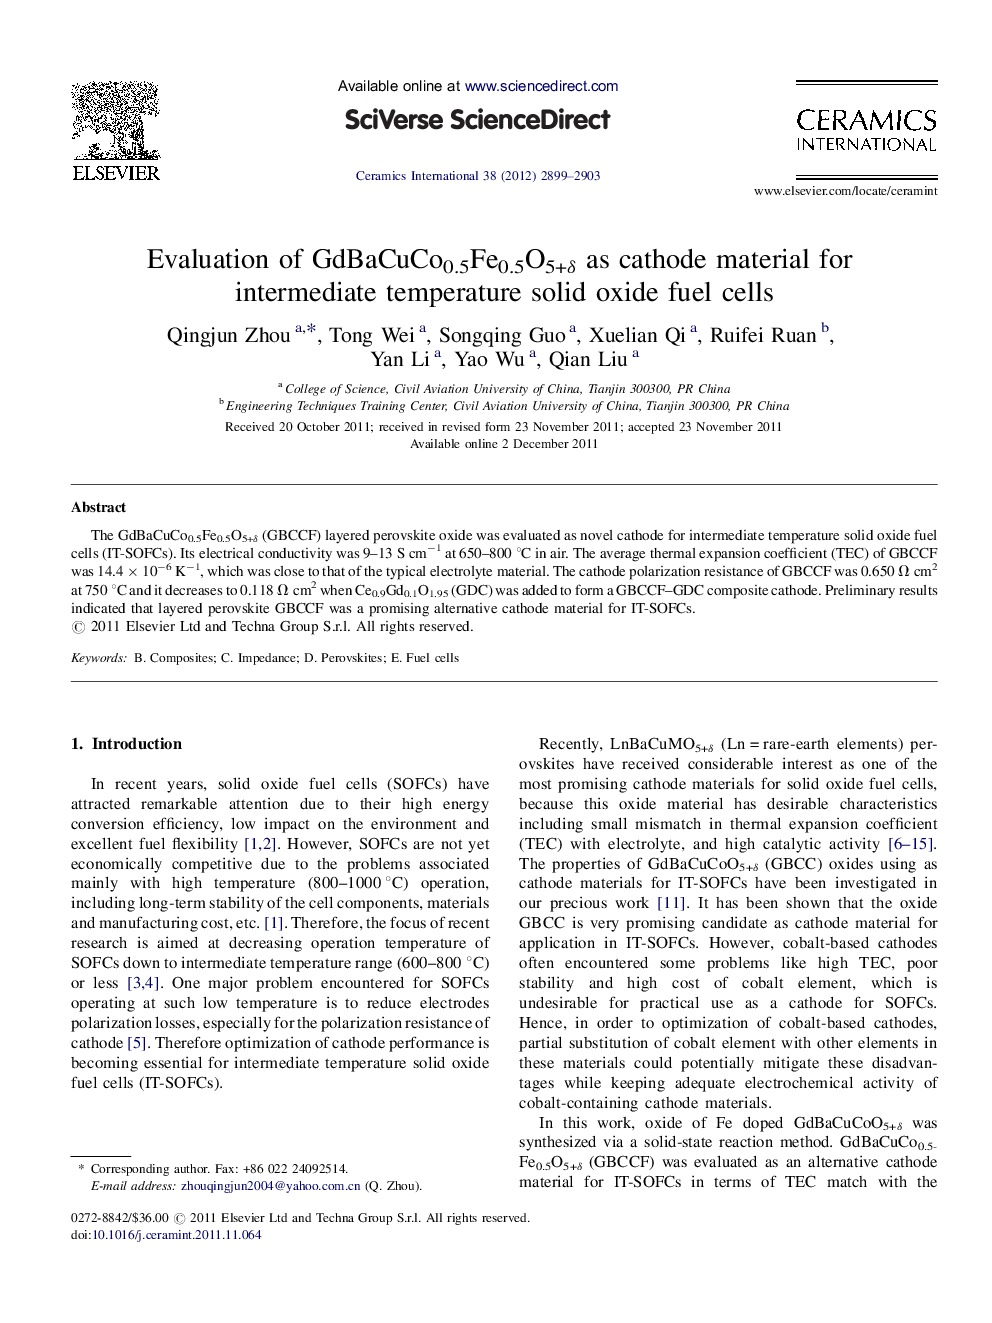 Evaluation of GdBaCuCo0.5Fe0.5O5+δ as cathode material for intermediate temperature solid oxide fuel cells